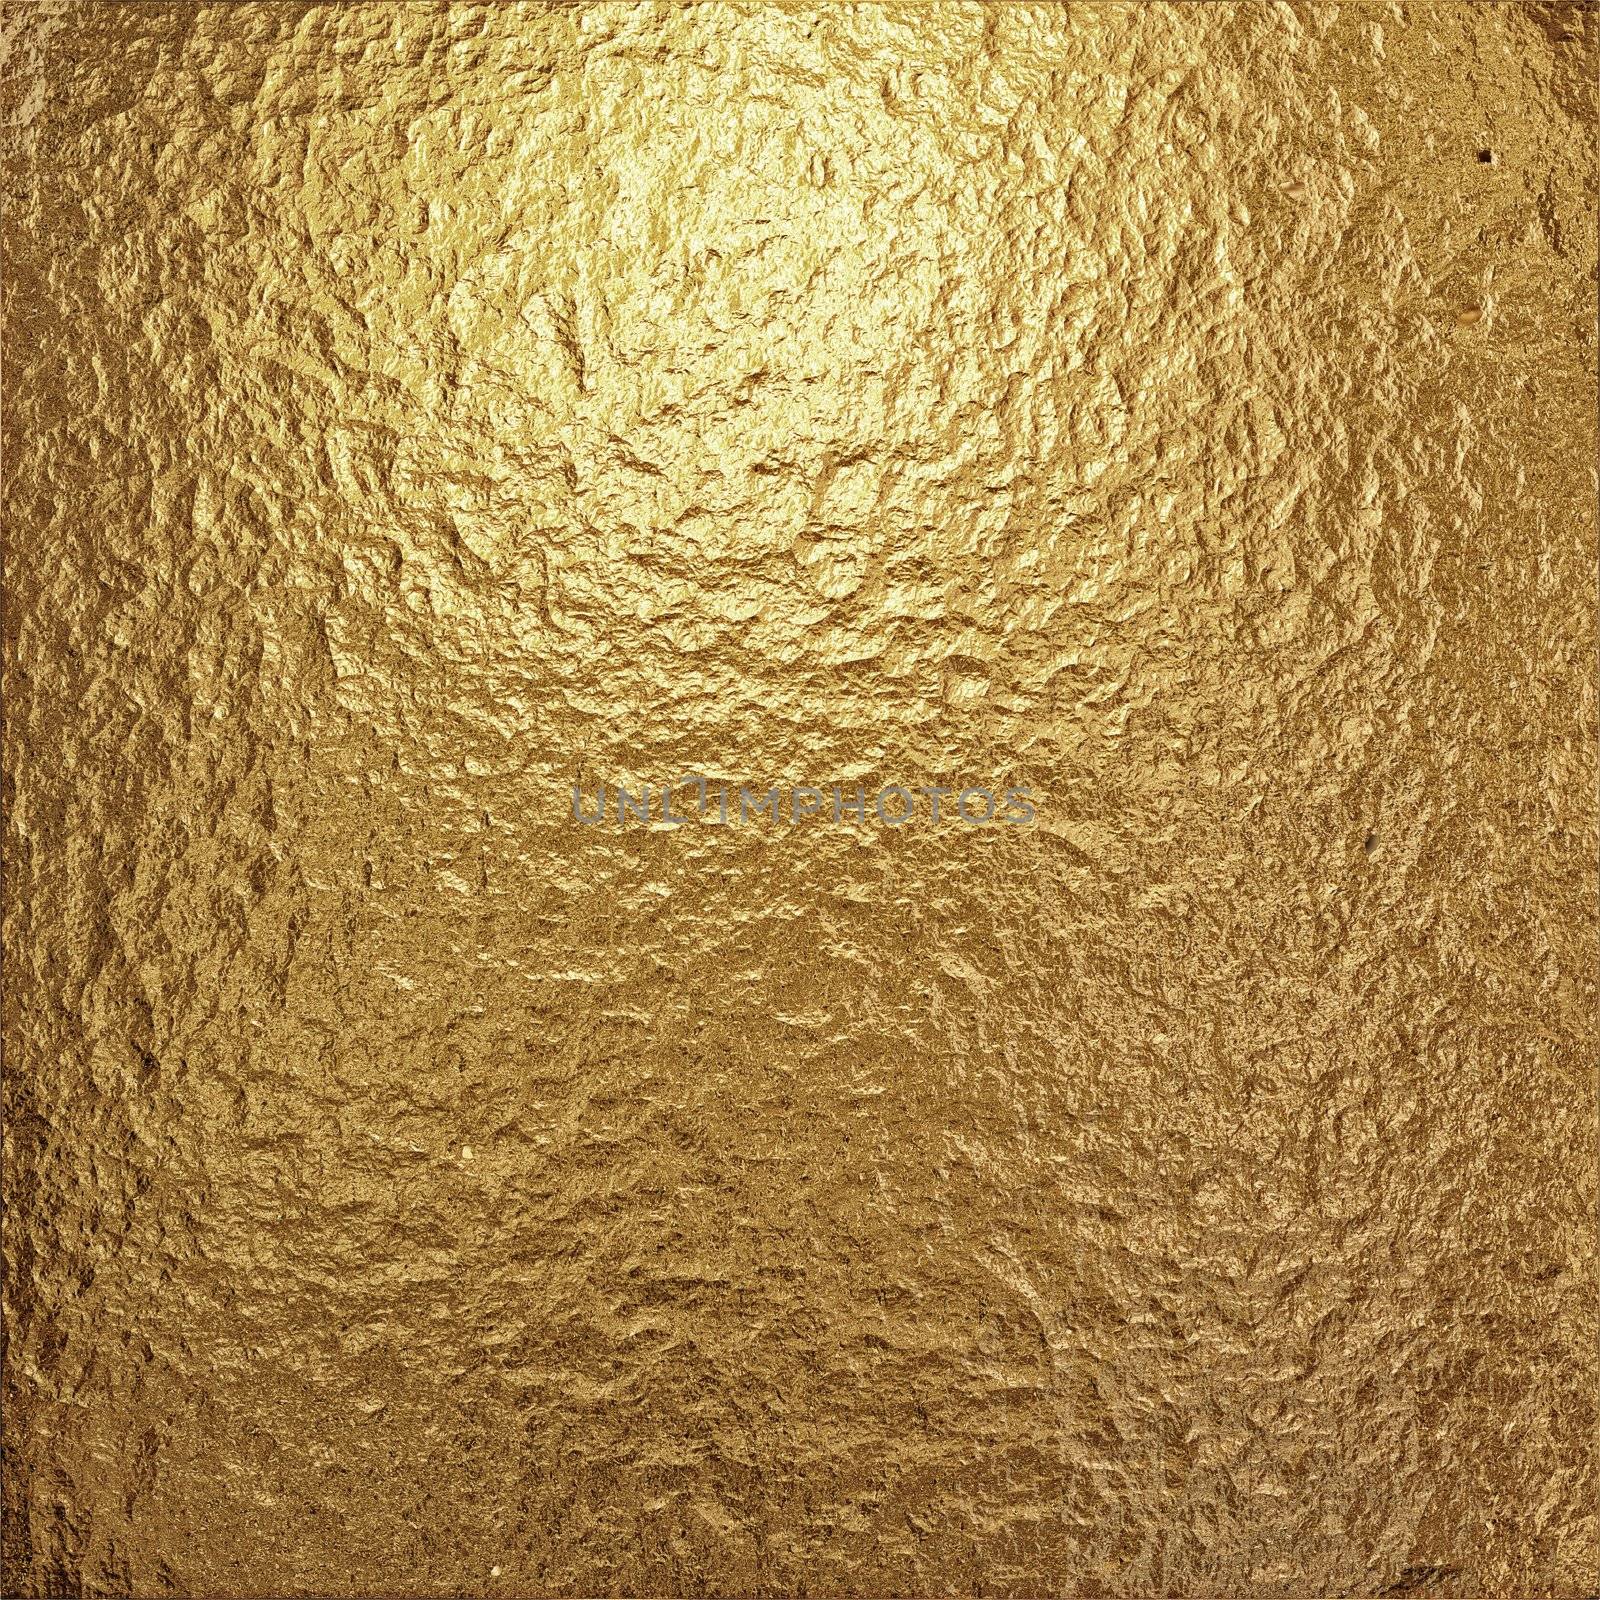  fine crinkled gold aluminium foil by clearviewstock